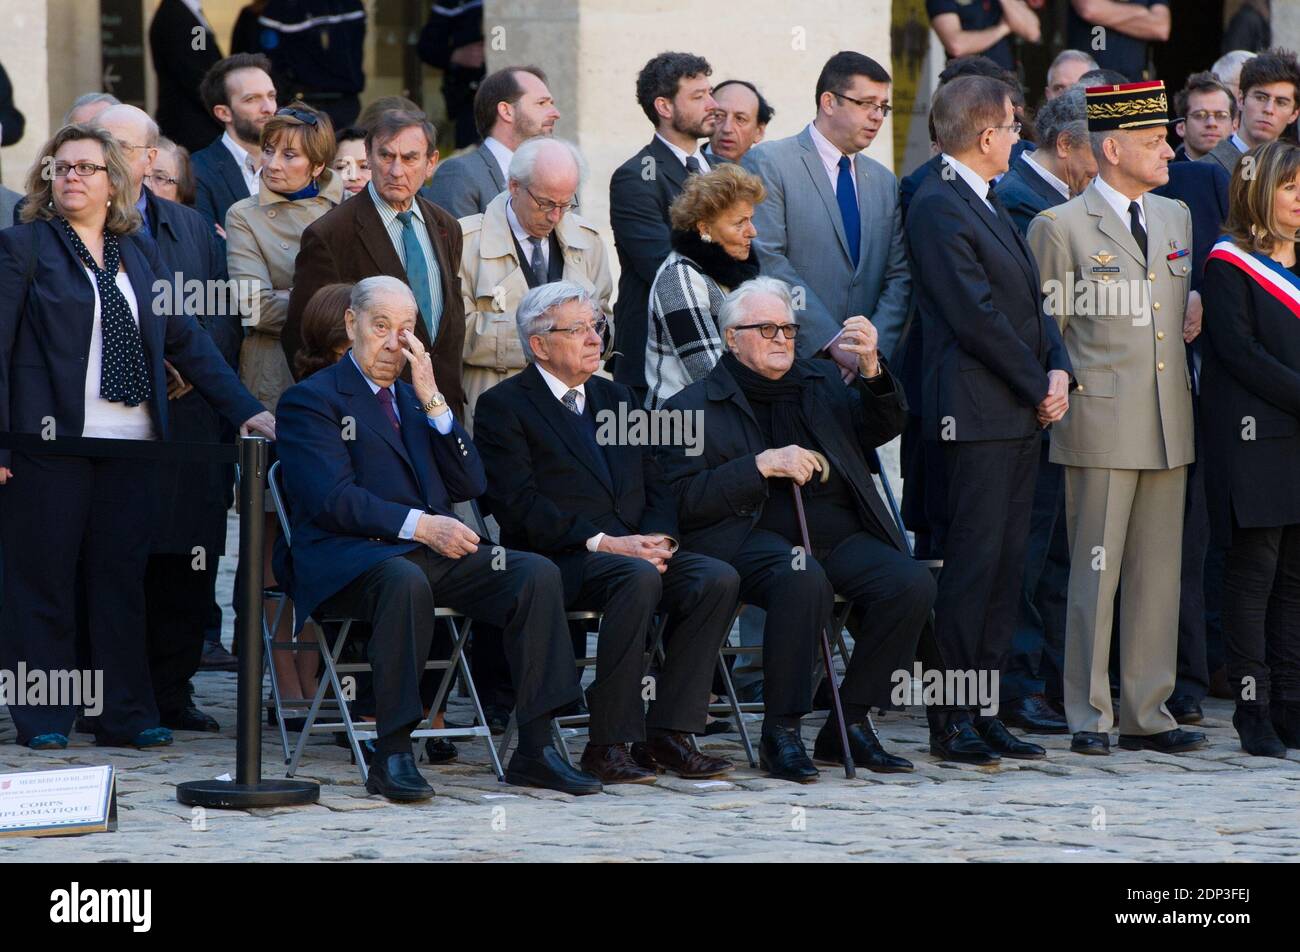 Former French Interior Minister Charles Pasqua, the leader of the Republican and Citizen Movement (MRC), Jean-Pierre Chevenement (C) and former Foreign Minister Roland Dumas attend a state funeral ceremony for late French World War II hero Jean-Louis Cremieux-Brilhac at the Hotel des Invalides in Paris, France on April 15, 2015. A towering figure in the French Resistance, Cremieux-Brilhac, one of the first to condemn the Nazi gas chambers, died on April 8, 2015 aged 98. Photo by Thierry Orban/ABACAPRESS.COM Stock Photo